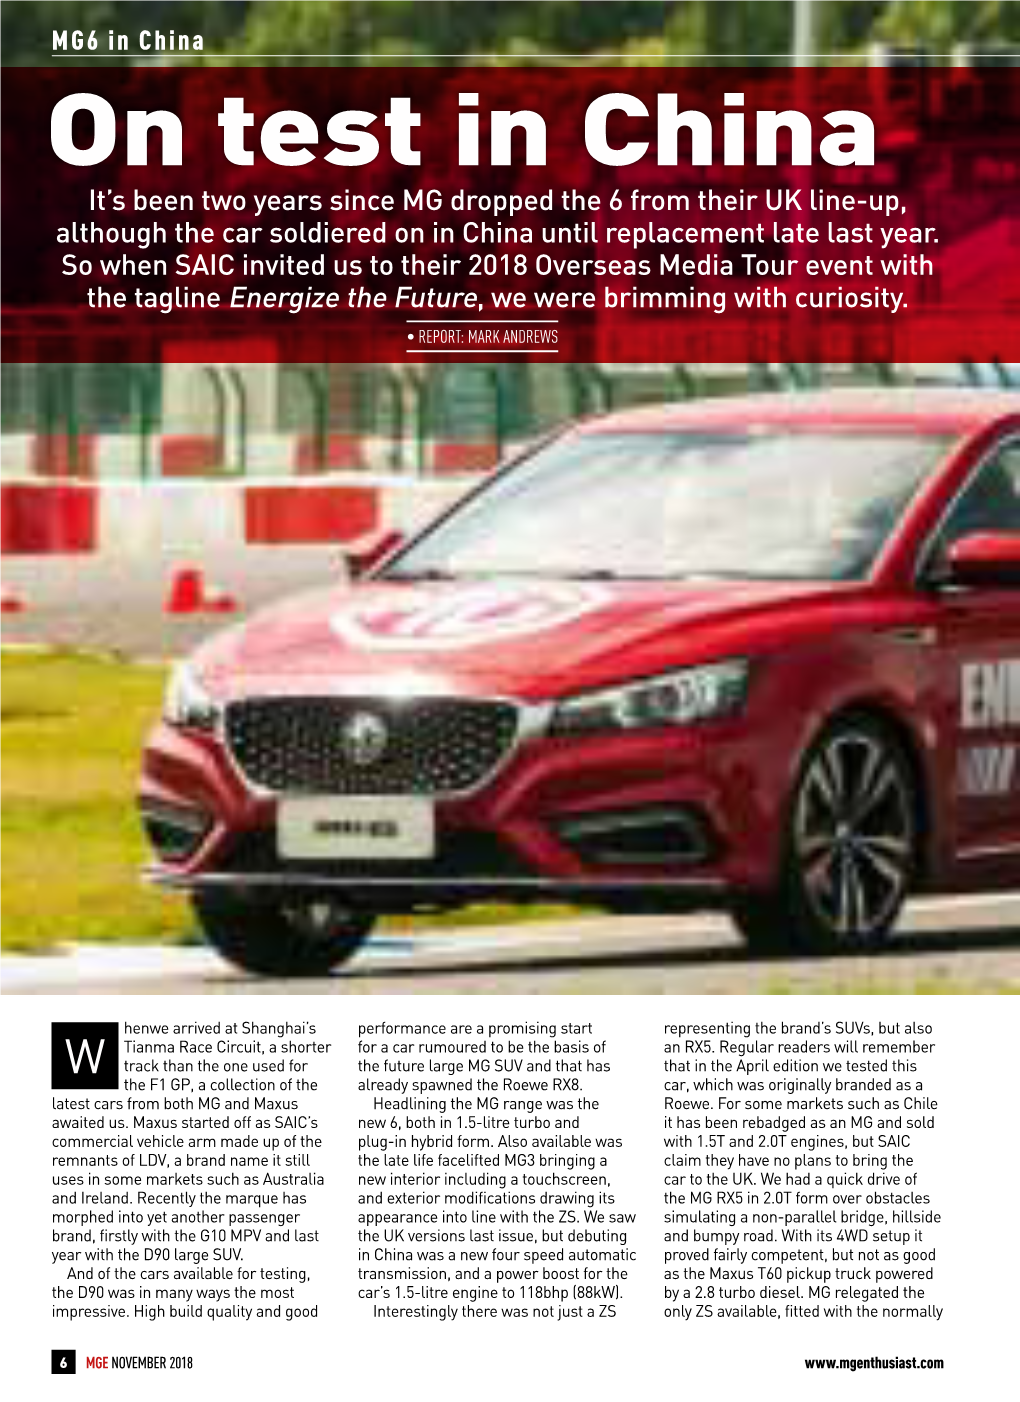 On Test in China It’S Been Two Years Since MG Dropped the 6 from Their UK Line-Up, Although the Car Soldiered on in China Until Replacement Late Last Year